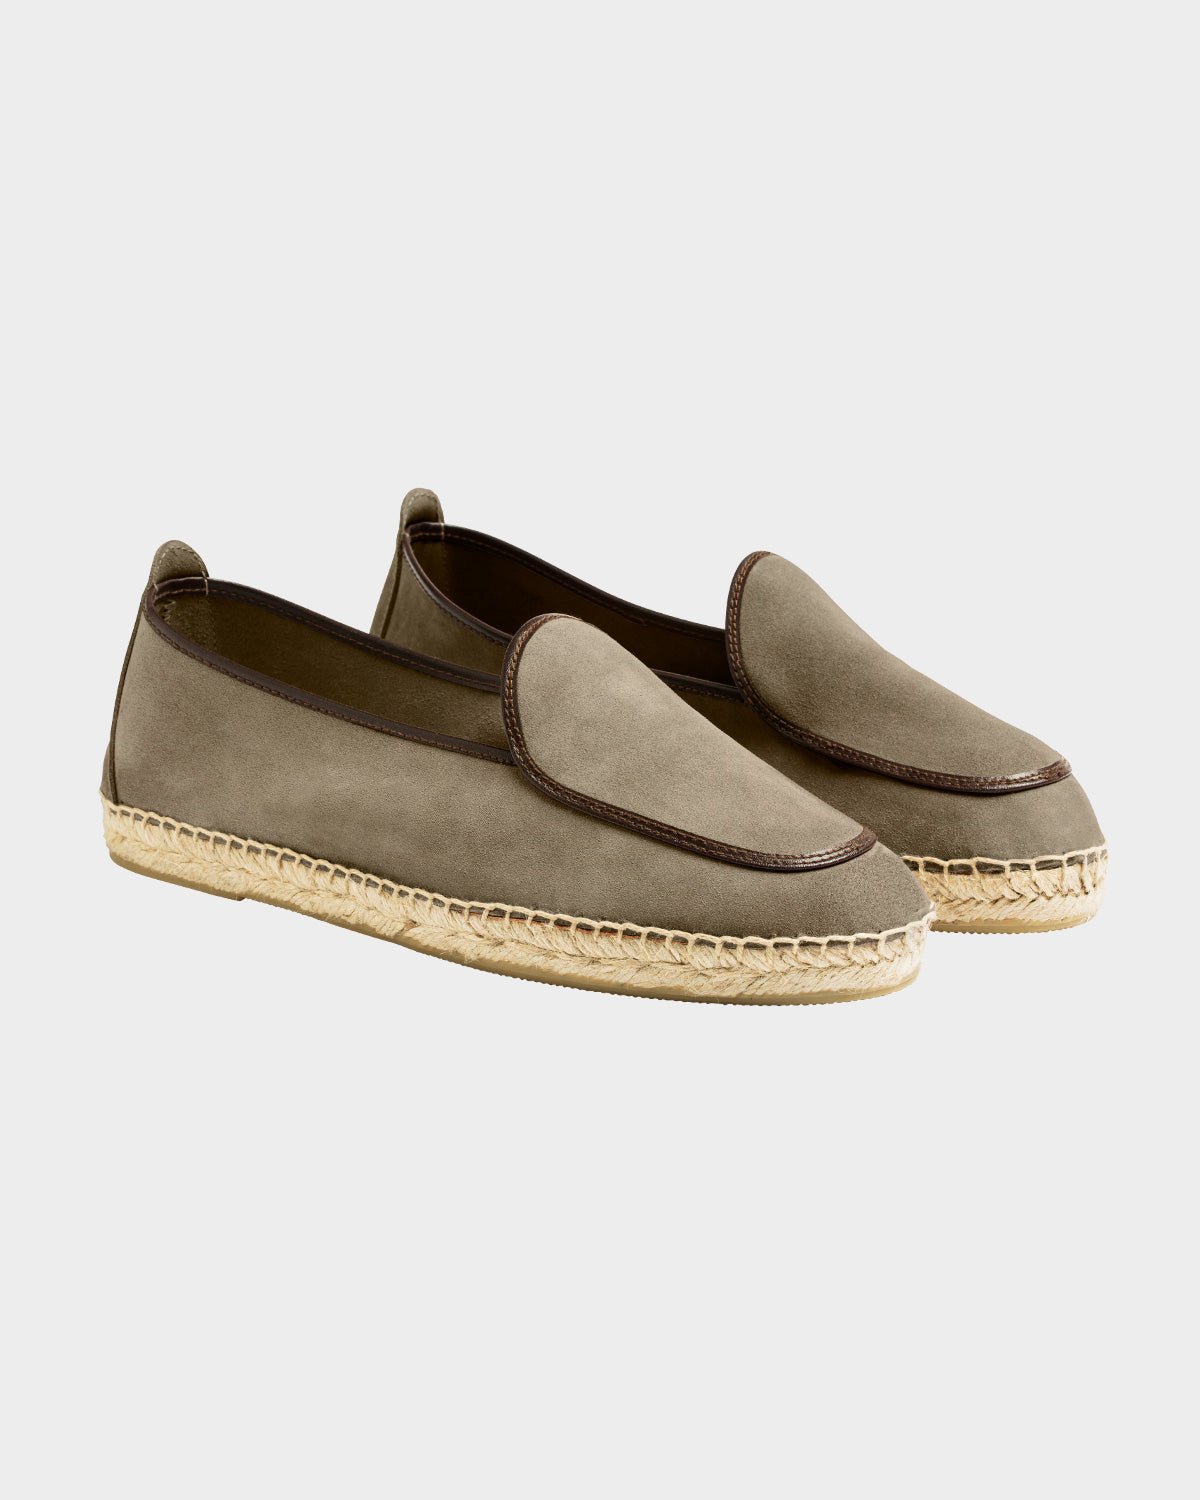 Espadrilles Belgian Loafer Style Taupe Suede - THE RESORT CO